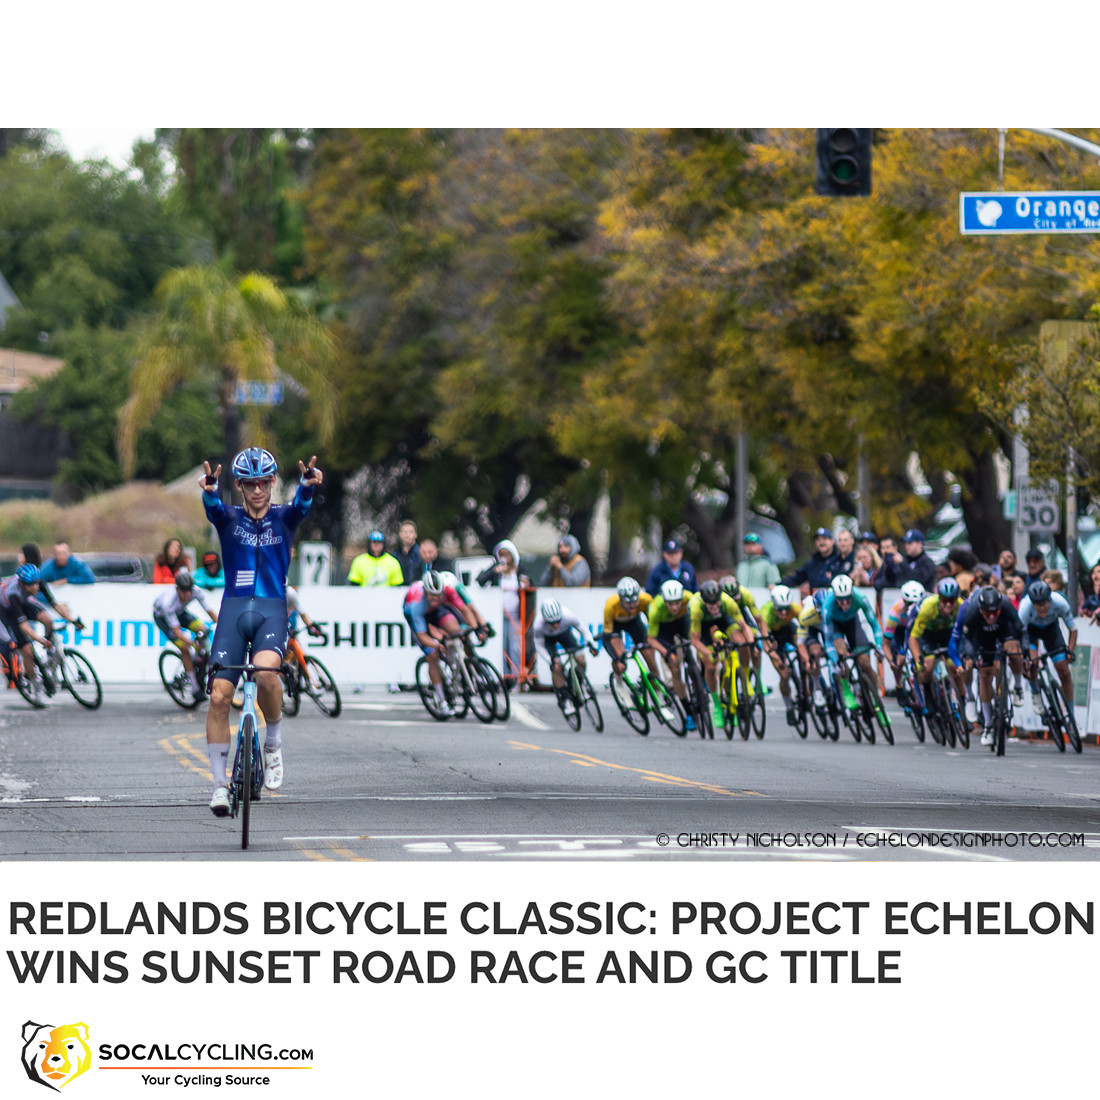 Redlands Bicycle Classic: Project Echelon Wins Sunset Road Race and GC Title

Report & Results @ socalcycling.com/2024/04/16/red…

#Cycling #Bicycling #BikeRacing #RedlandsBicycleClassic #RedlandsClassic #CyclingResults #ProCycling